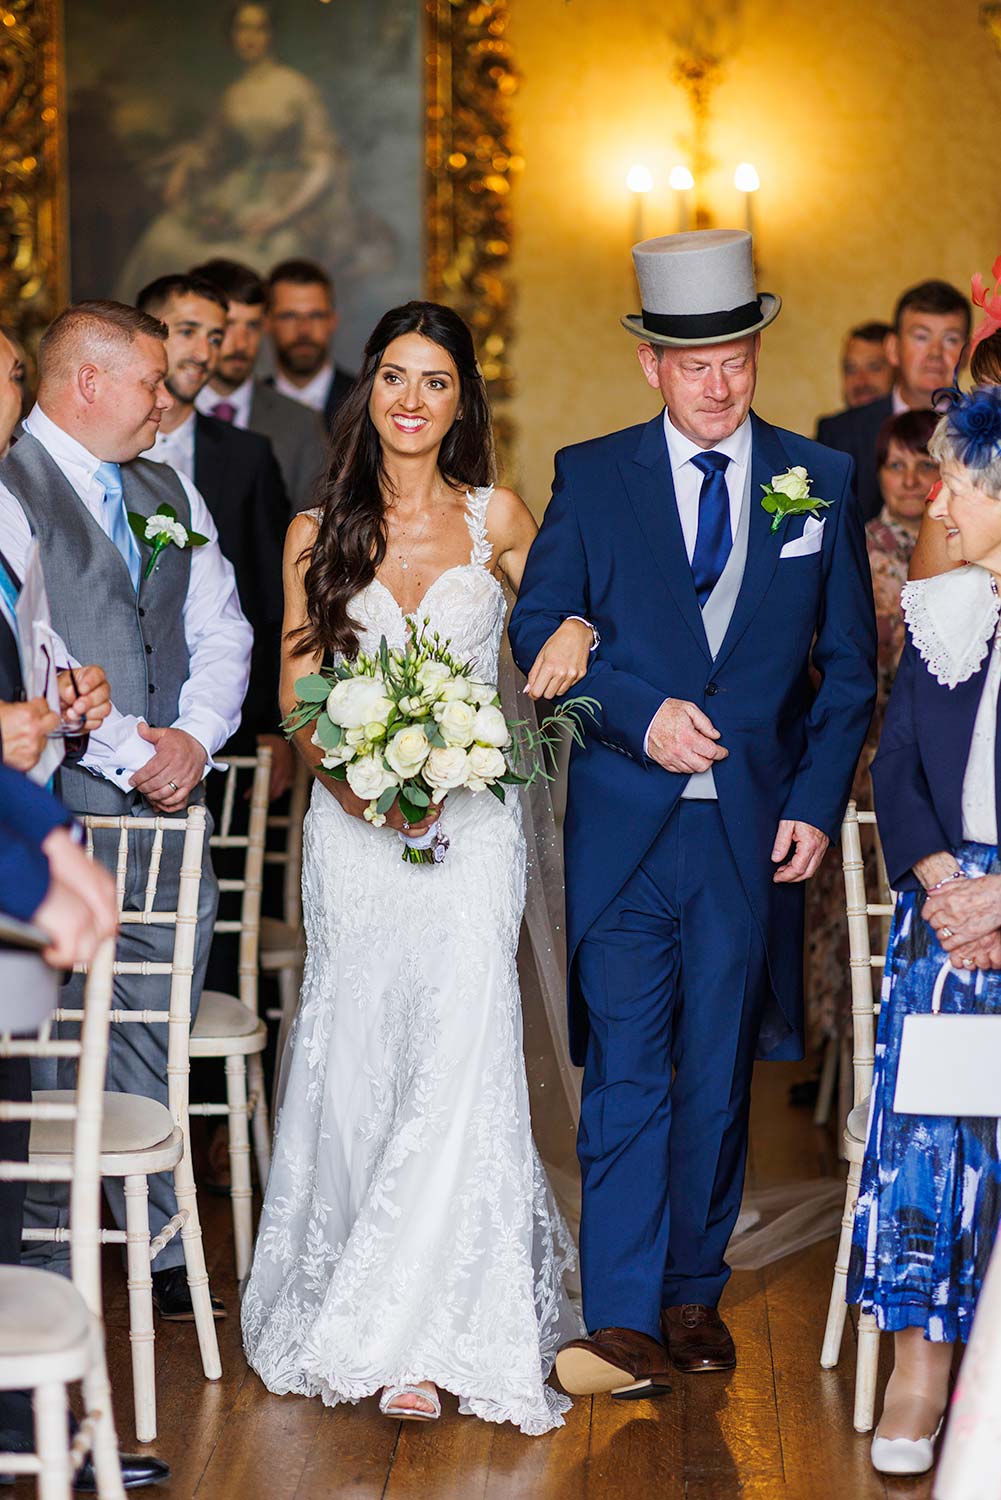 Smiling bride walks down the aisle with her dad who is wearing a grey top hat.